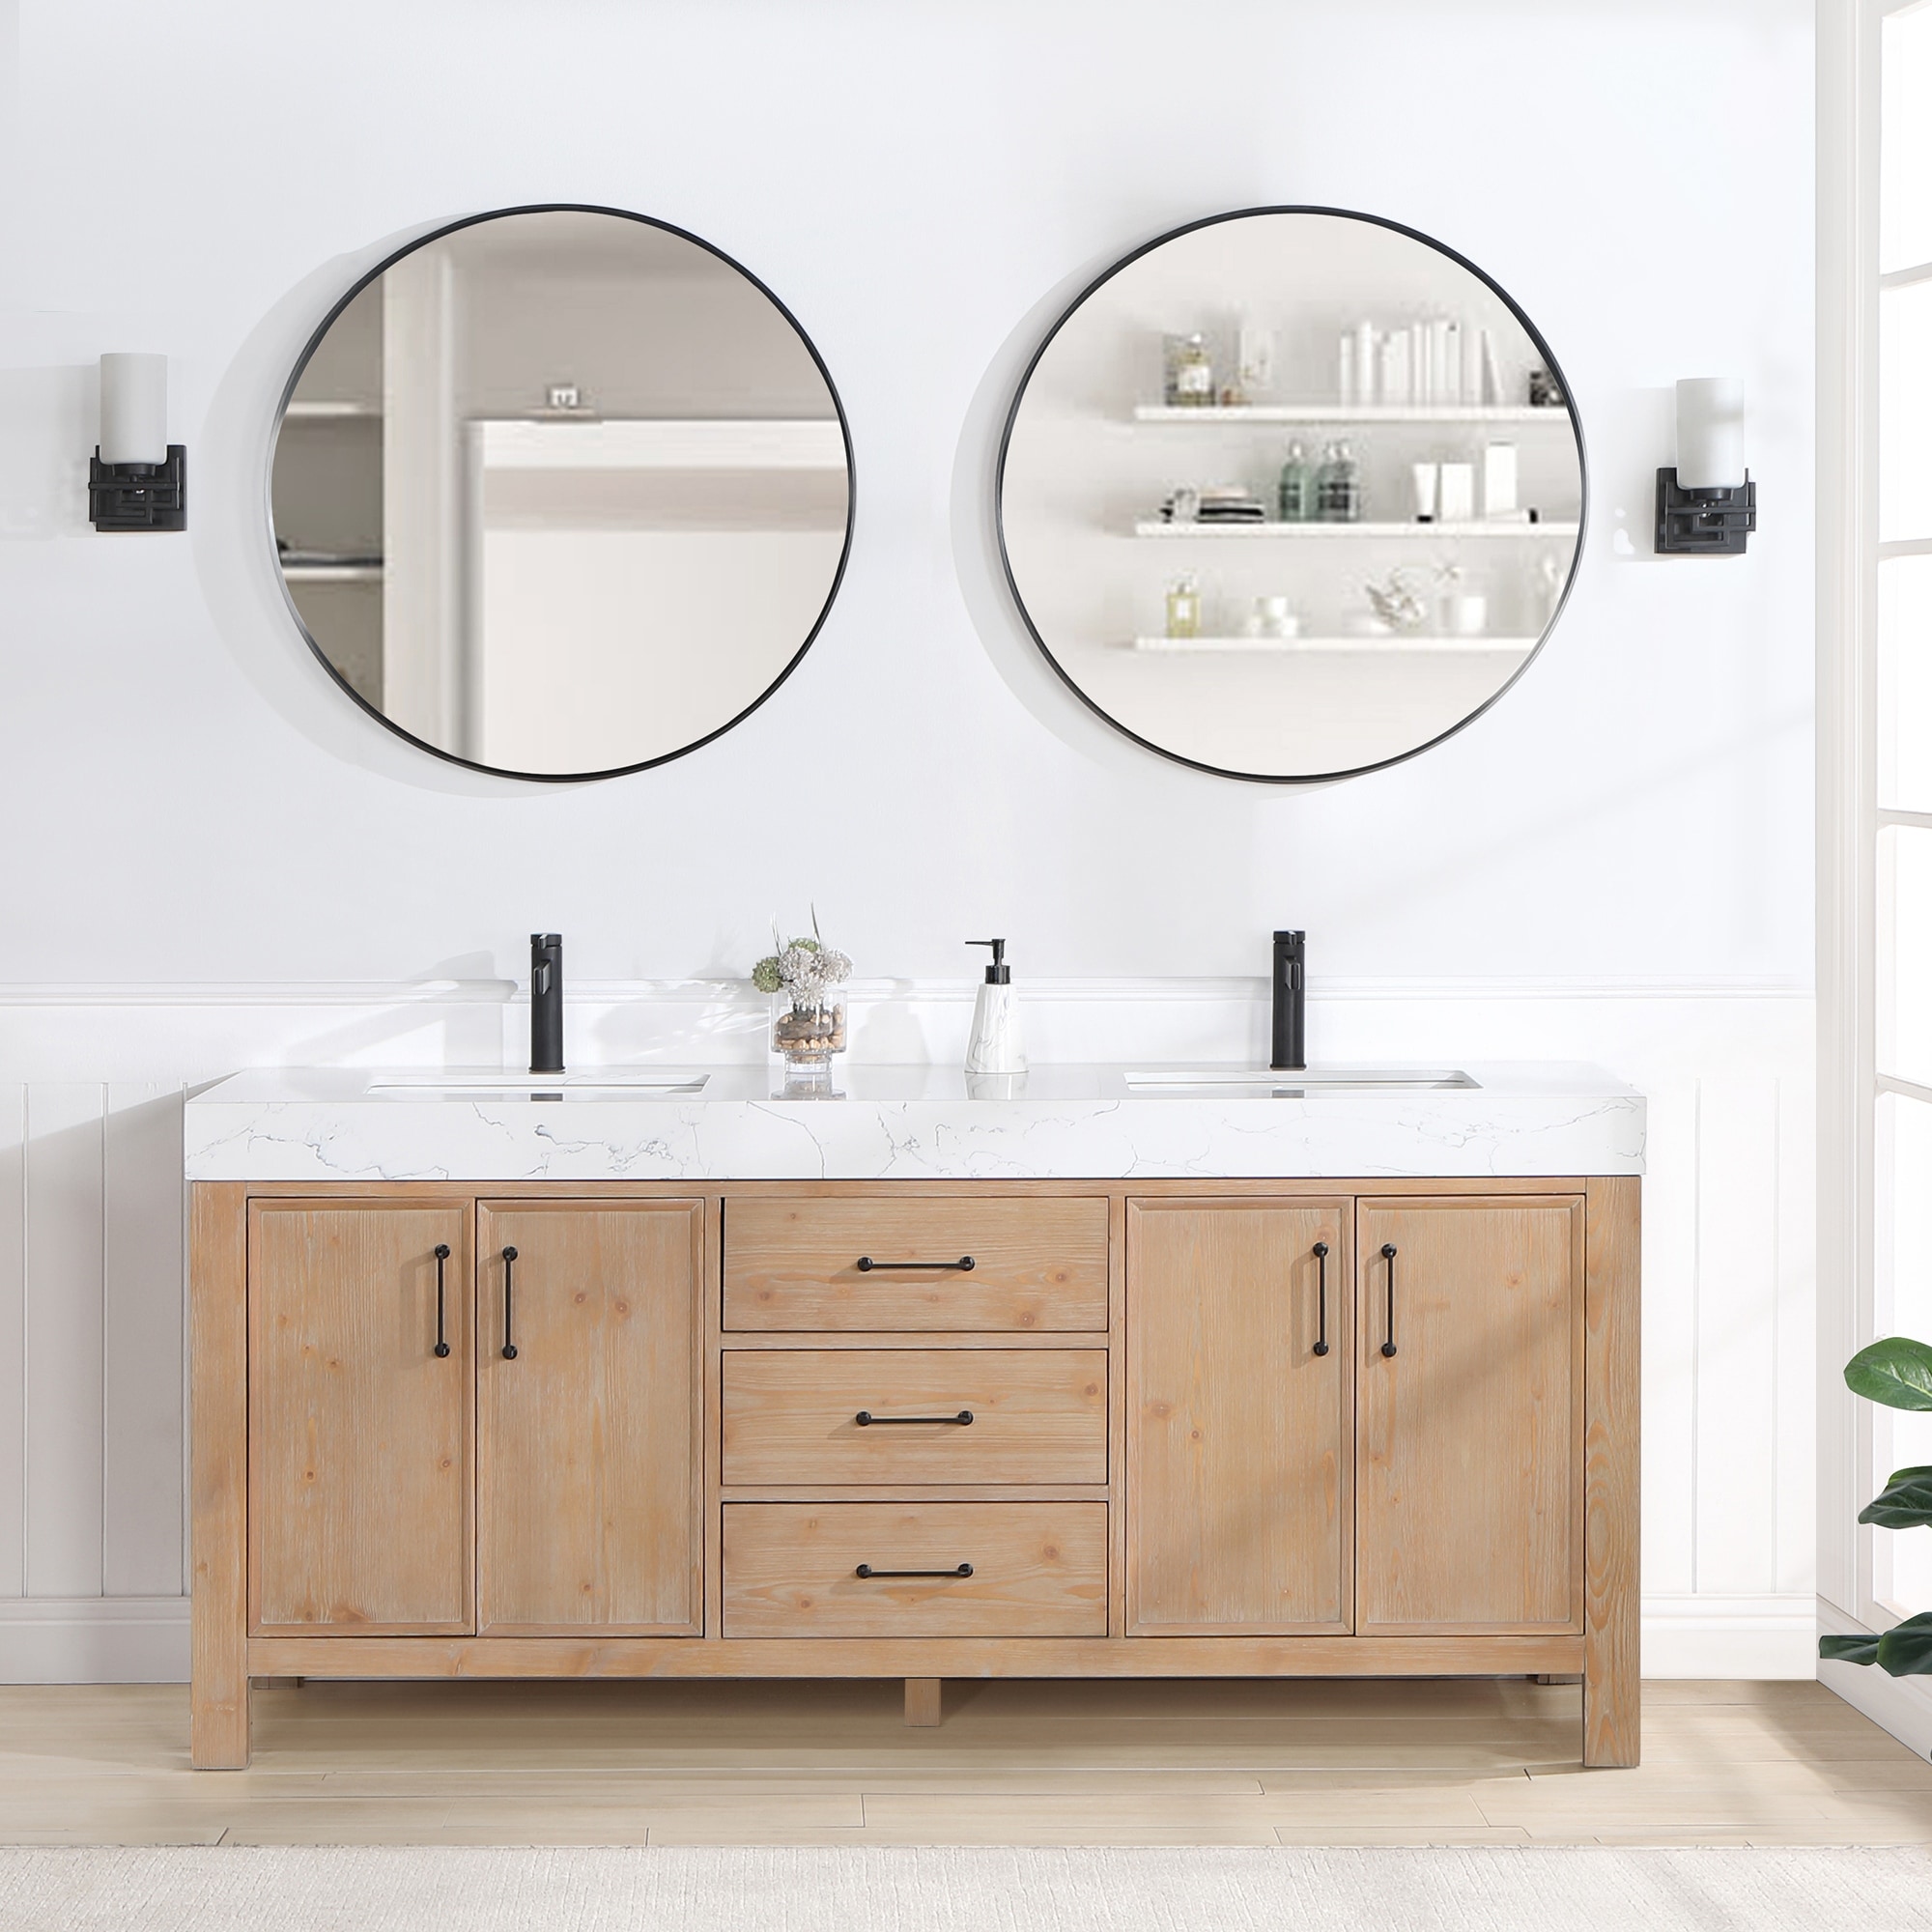 https://ak1.ostkcdn.com/images/products/is/images/direct/27cc92b3799c69f8f72bd0505917948877aba6df/Leon-72-in.-Double-Bathroom-Vanity-in-Fir-Wood-with-Composite-top.jpg